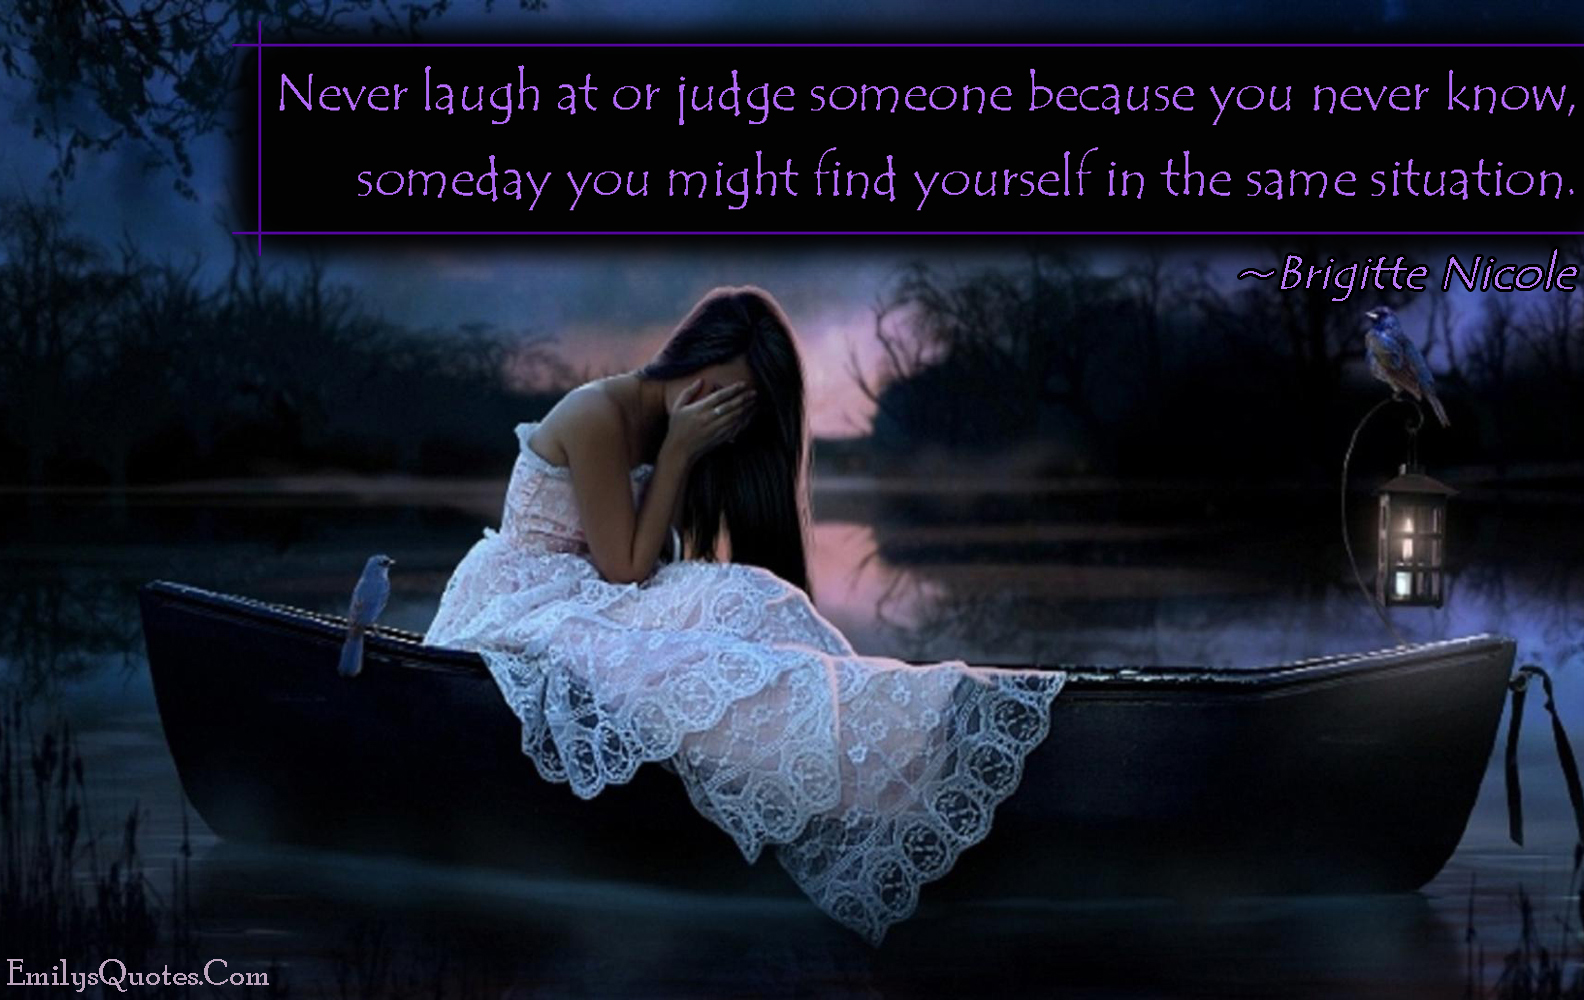 Never laugh at or judge someone because you never know, someday you might find yourself in the same situation